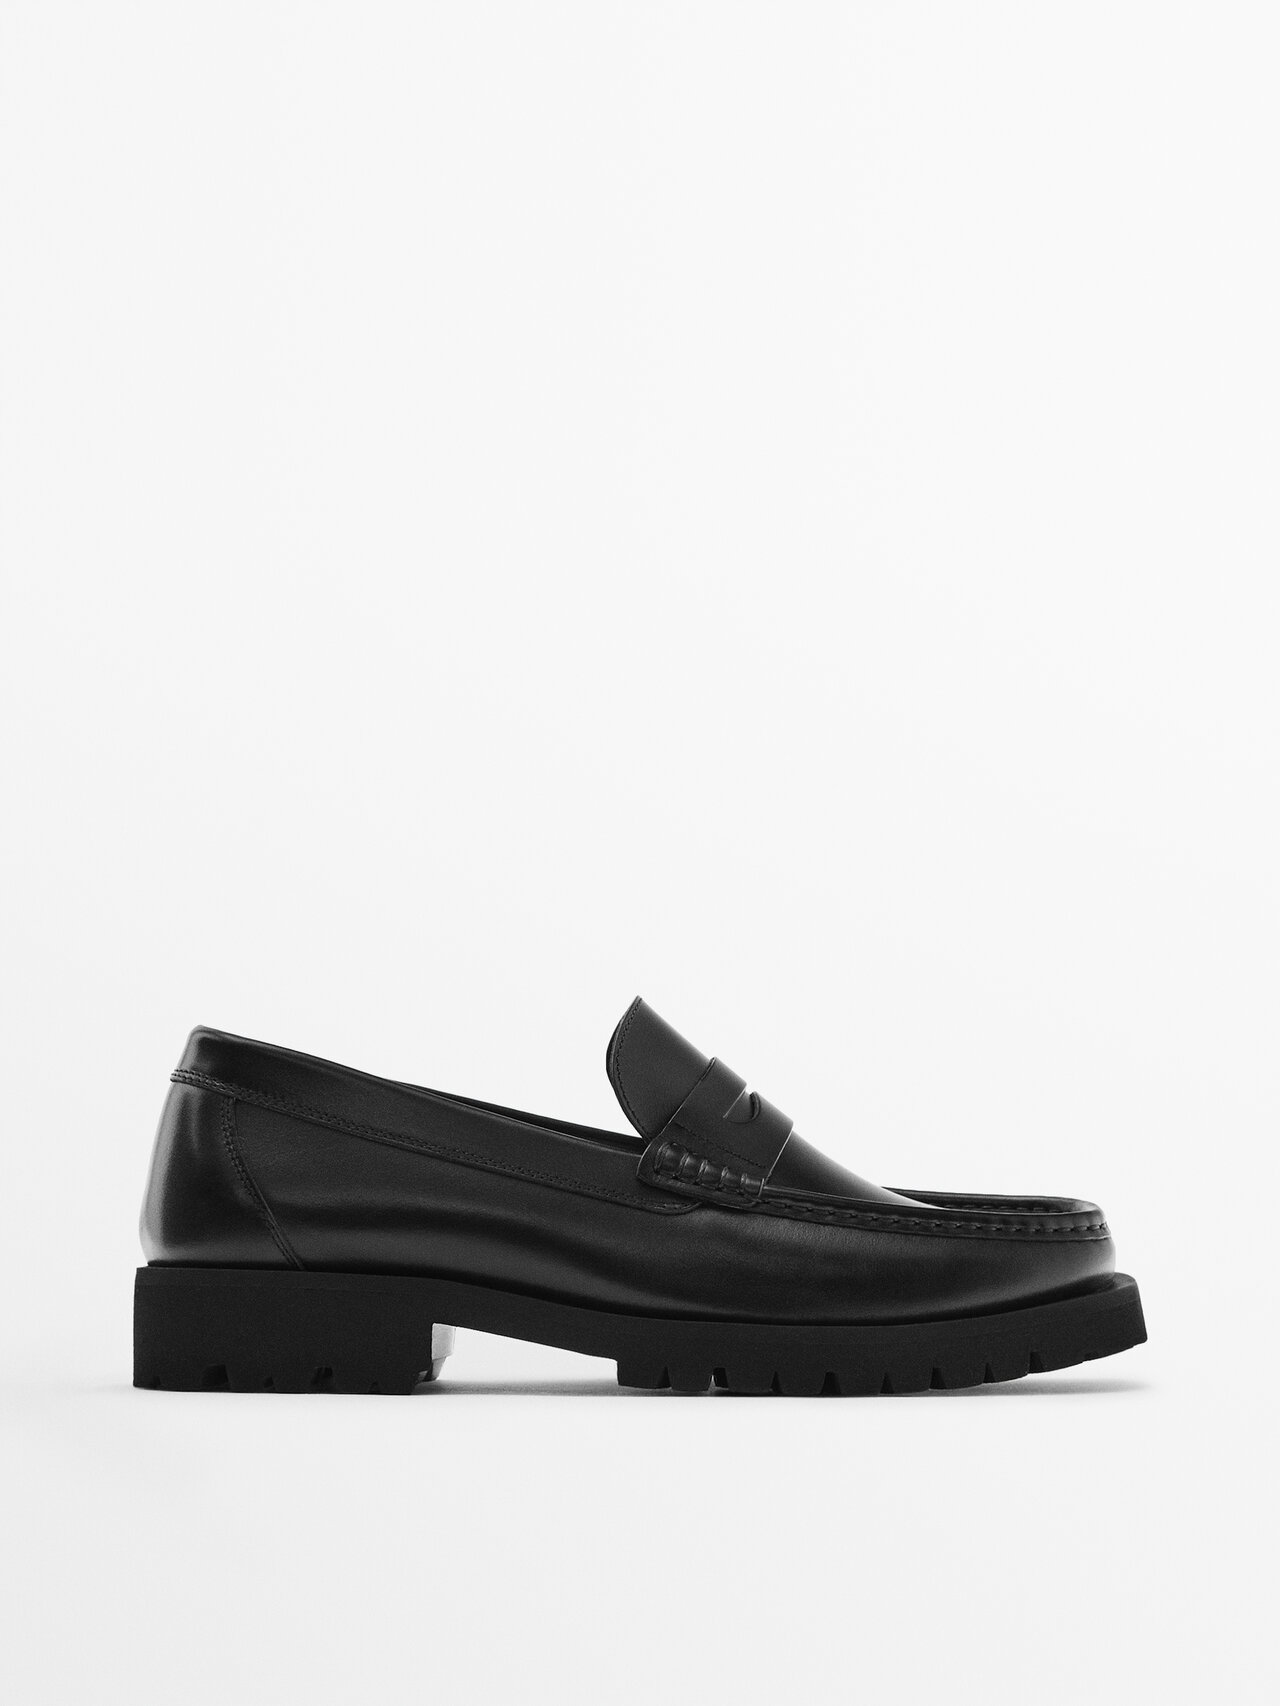 Massimo Dutti Brushed Nappa Leather Loafers - Studio In Black